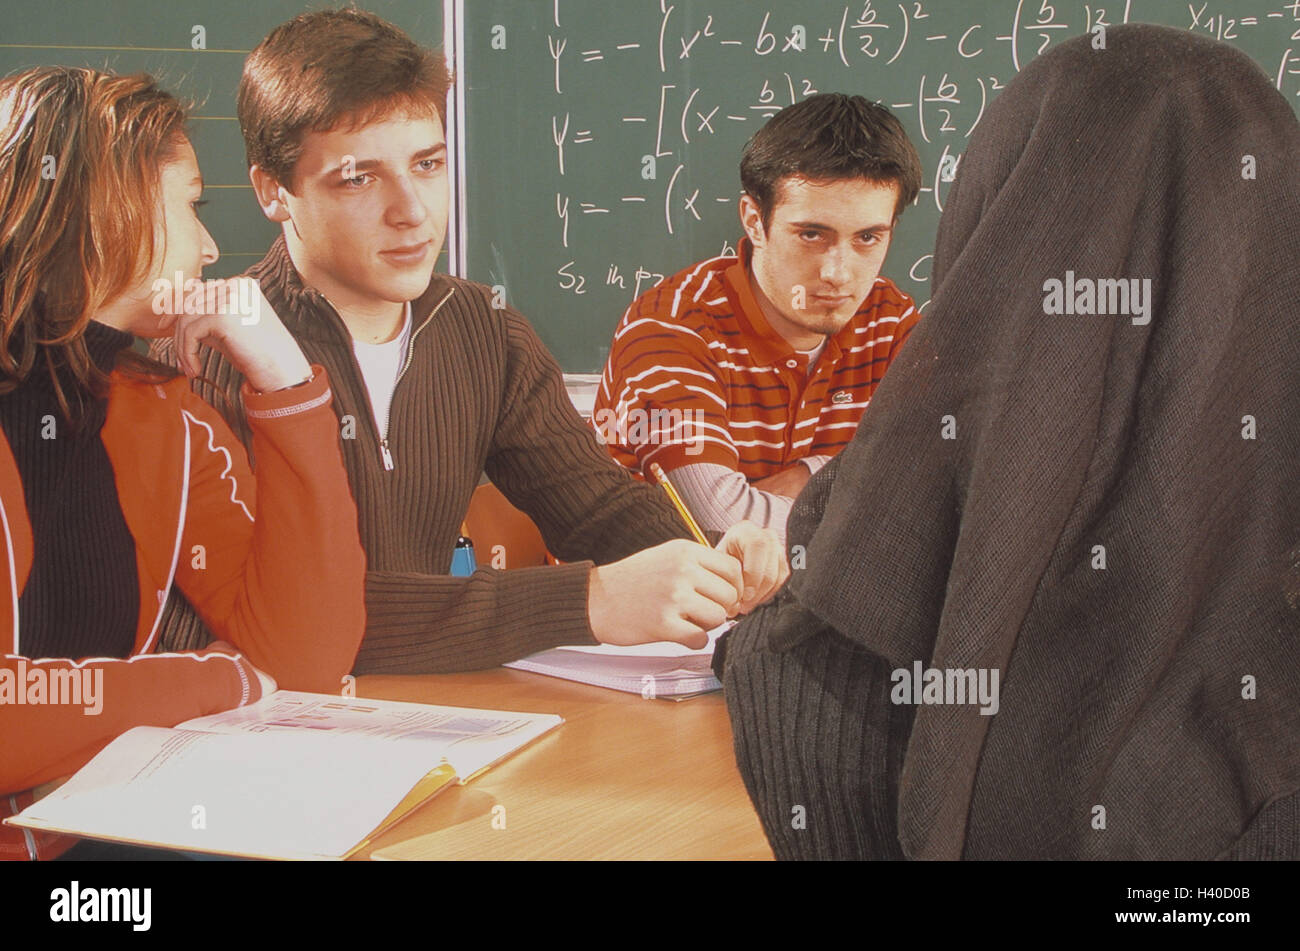 Classrooms, schoolgirl, headscarf, back view, school-friend, observation, contemptuous, school, schoolboy, schoolgirls, young persons, teenagers, 17 years, Ausländerin, outsider, loner, headgear, faith, religion, religiousness, nationality, differently, s Stock Photo